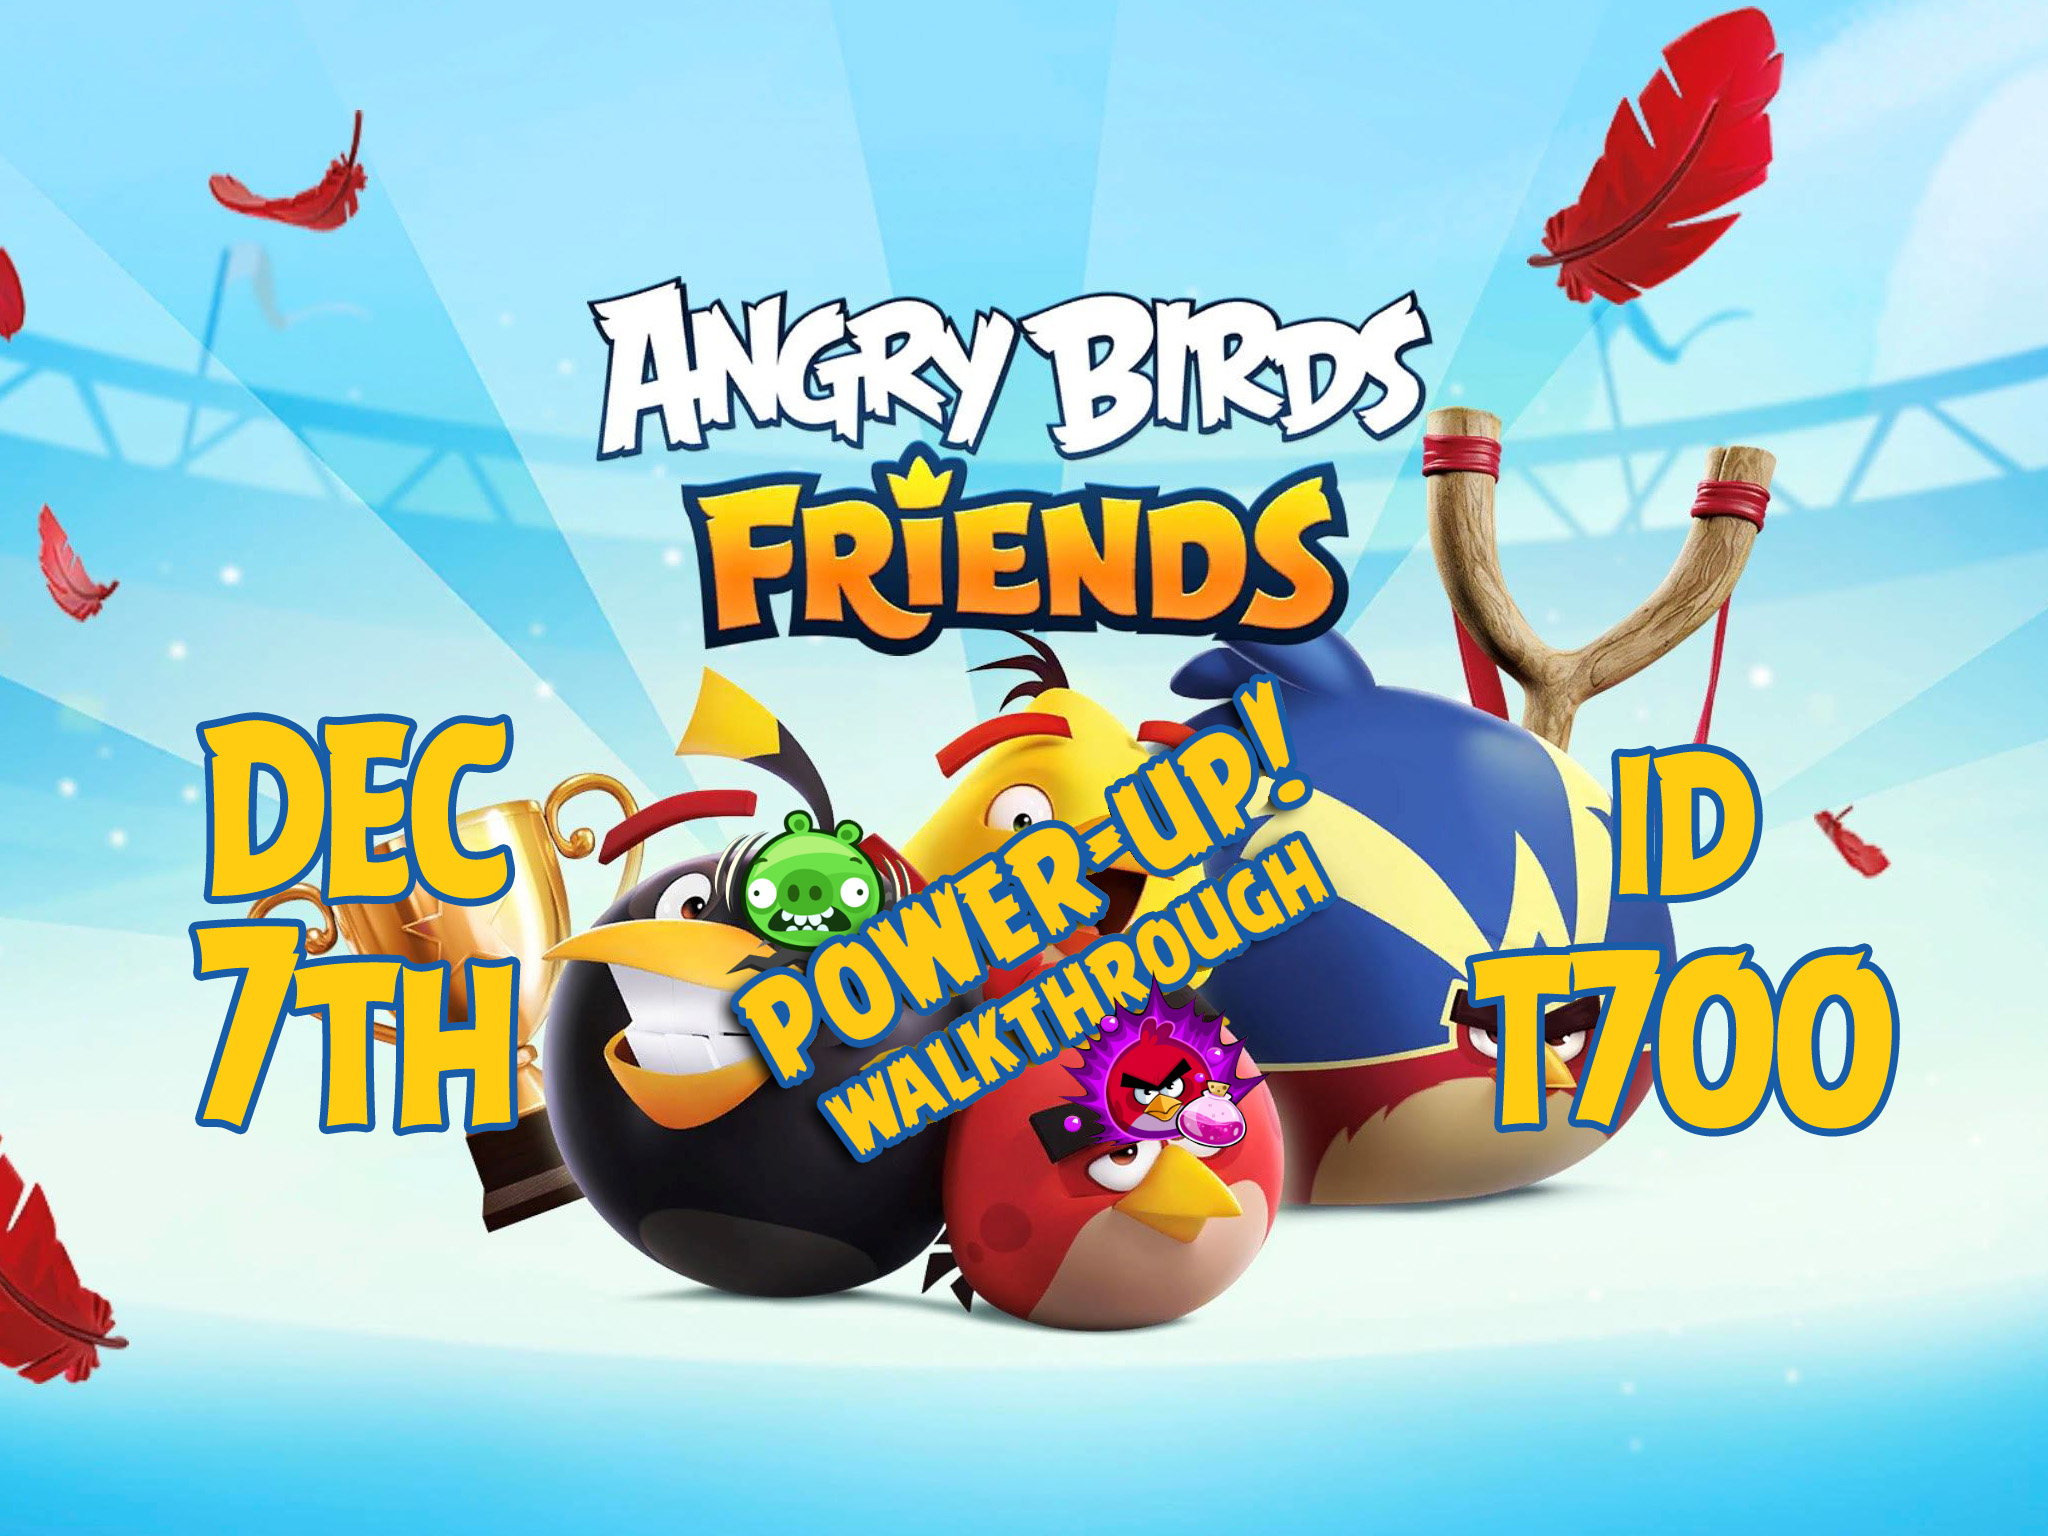 Angry-Birds-Friends-Tournament-T700-Feature-Image-PU